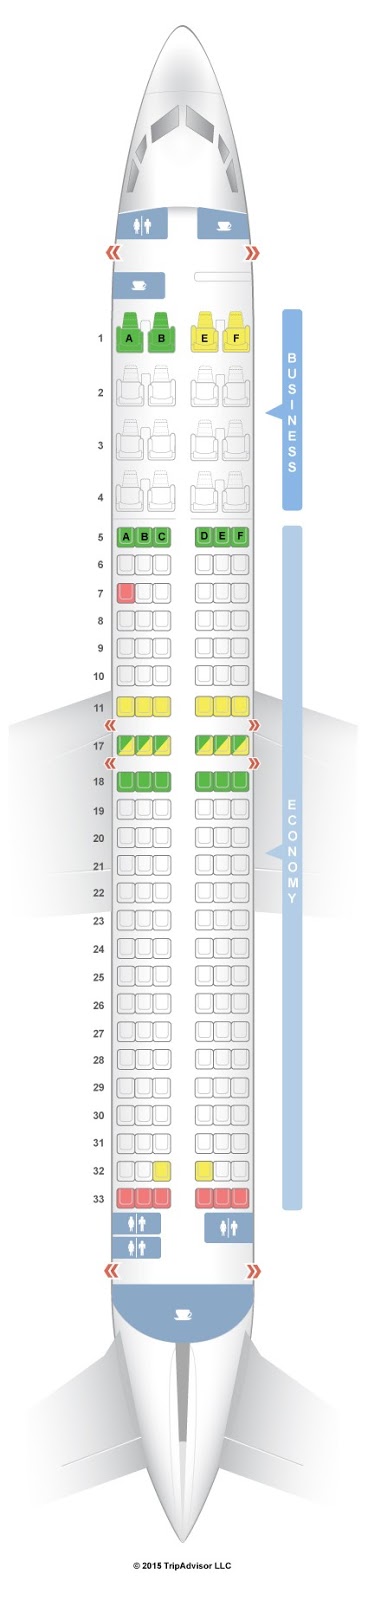 Lovely Boeing 737-800 Seat Map